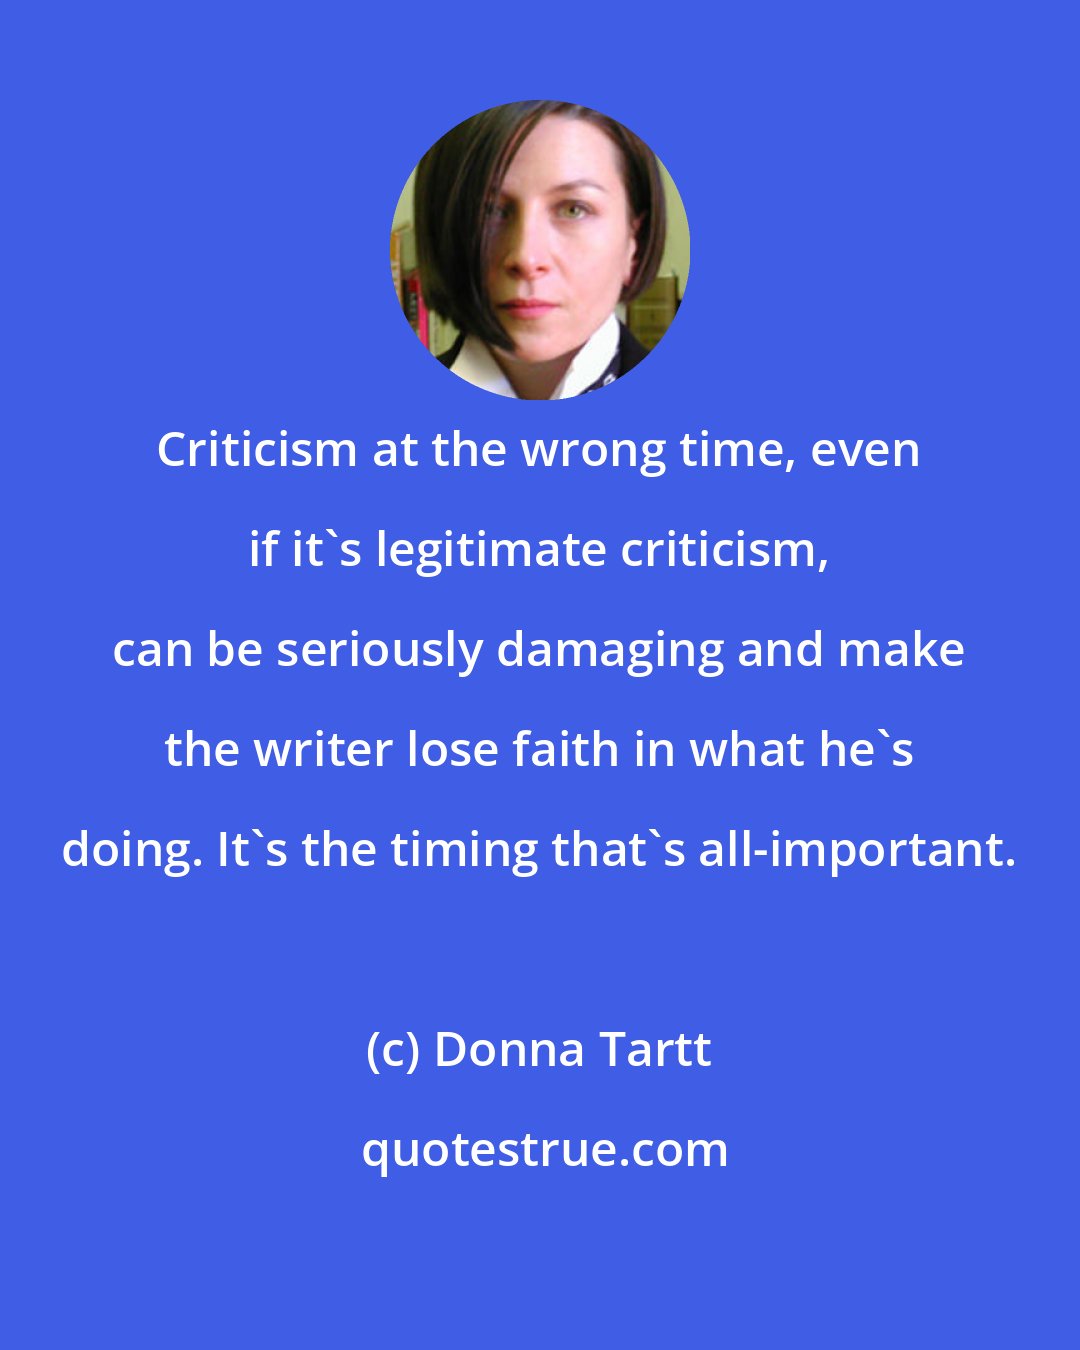 Donna Tartt: Criticism at the wrong time, even if it's legitimate criticism, can be seriously damaging and make the writer lose faith in what he's doing. It's the timing that's all-important.